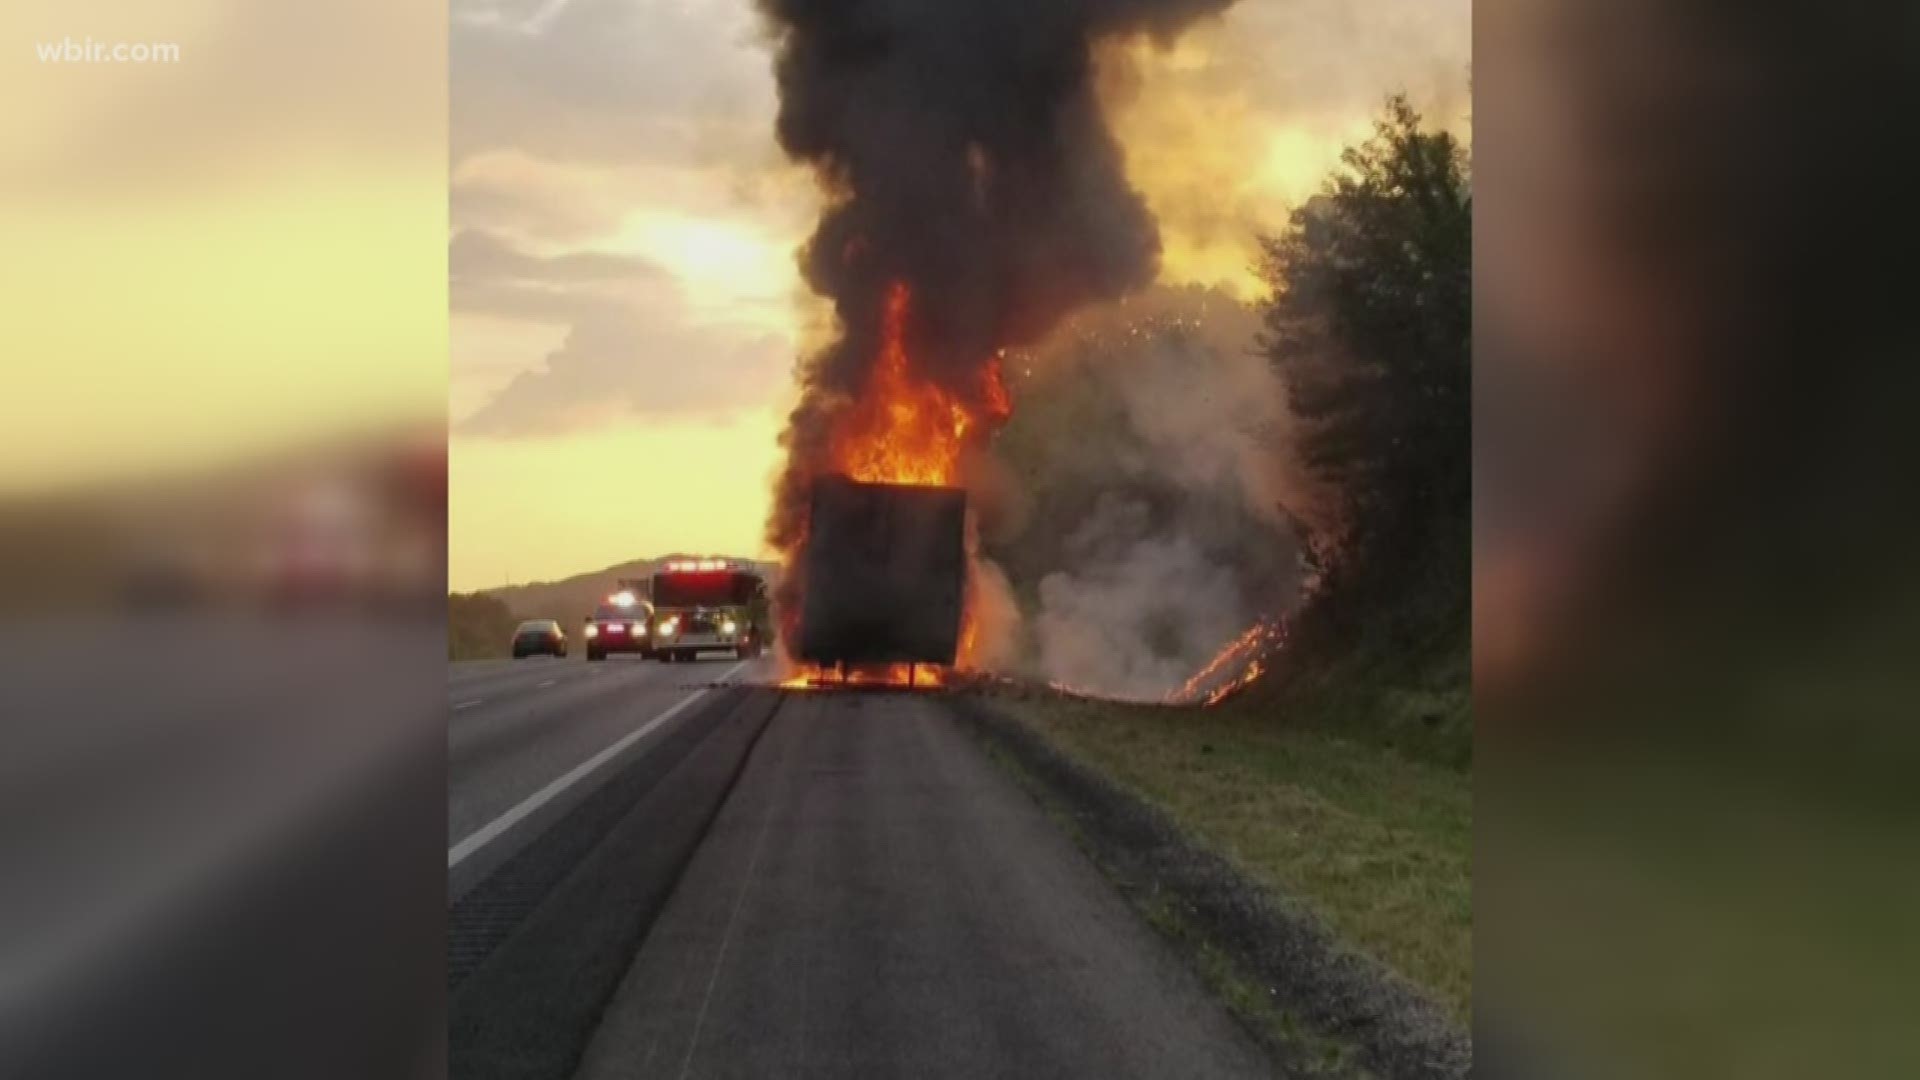 Crews were still working to clear the scene of a tractor-trailer fire on I-40 in East Knoxville hours after it was extinguished.